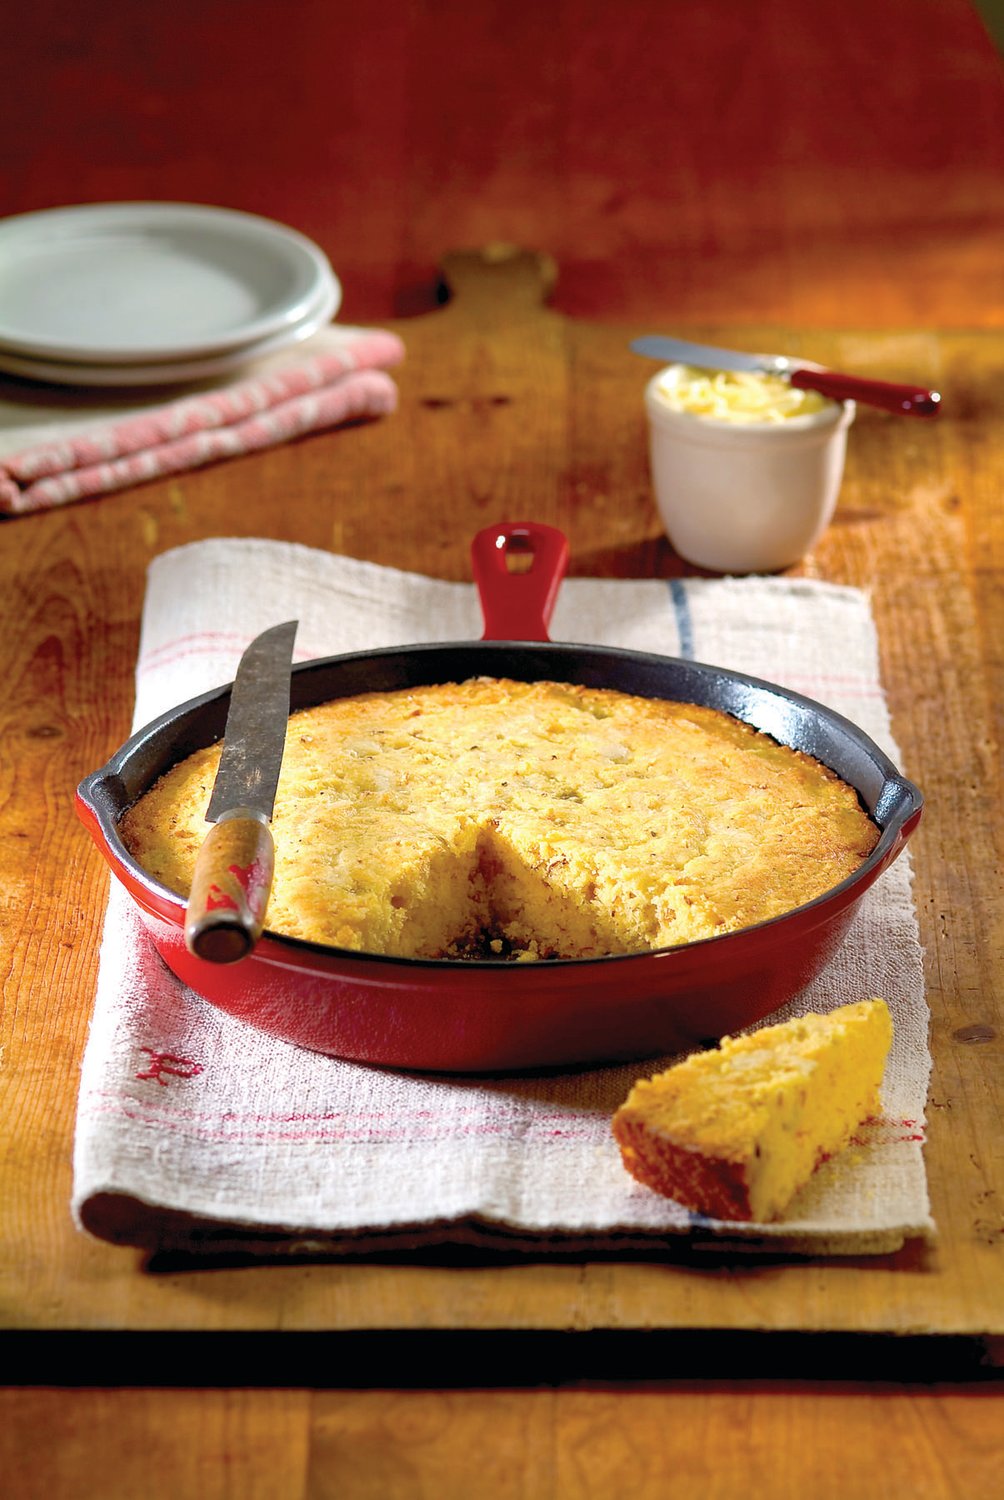 Cheesy Popcorn Bread is one way to enjoy America’s oldest and lowest-calorie snack grain.